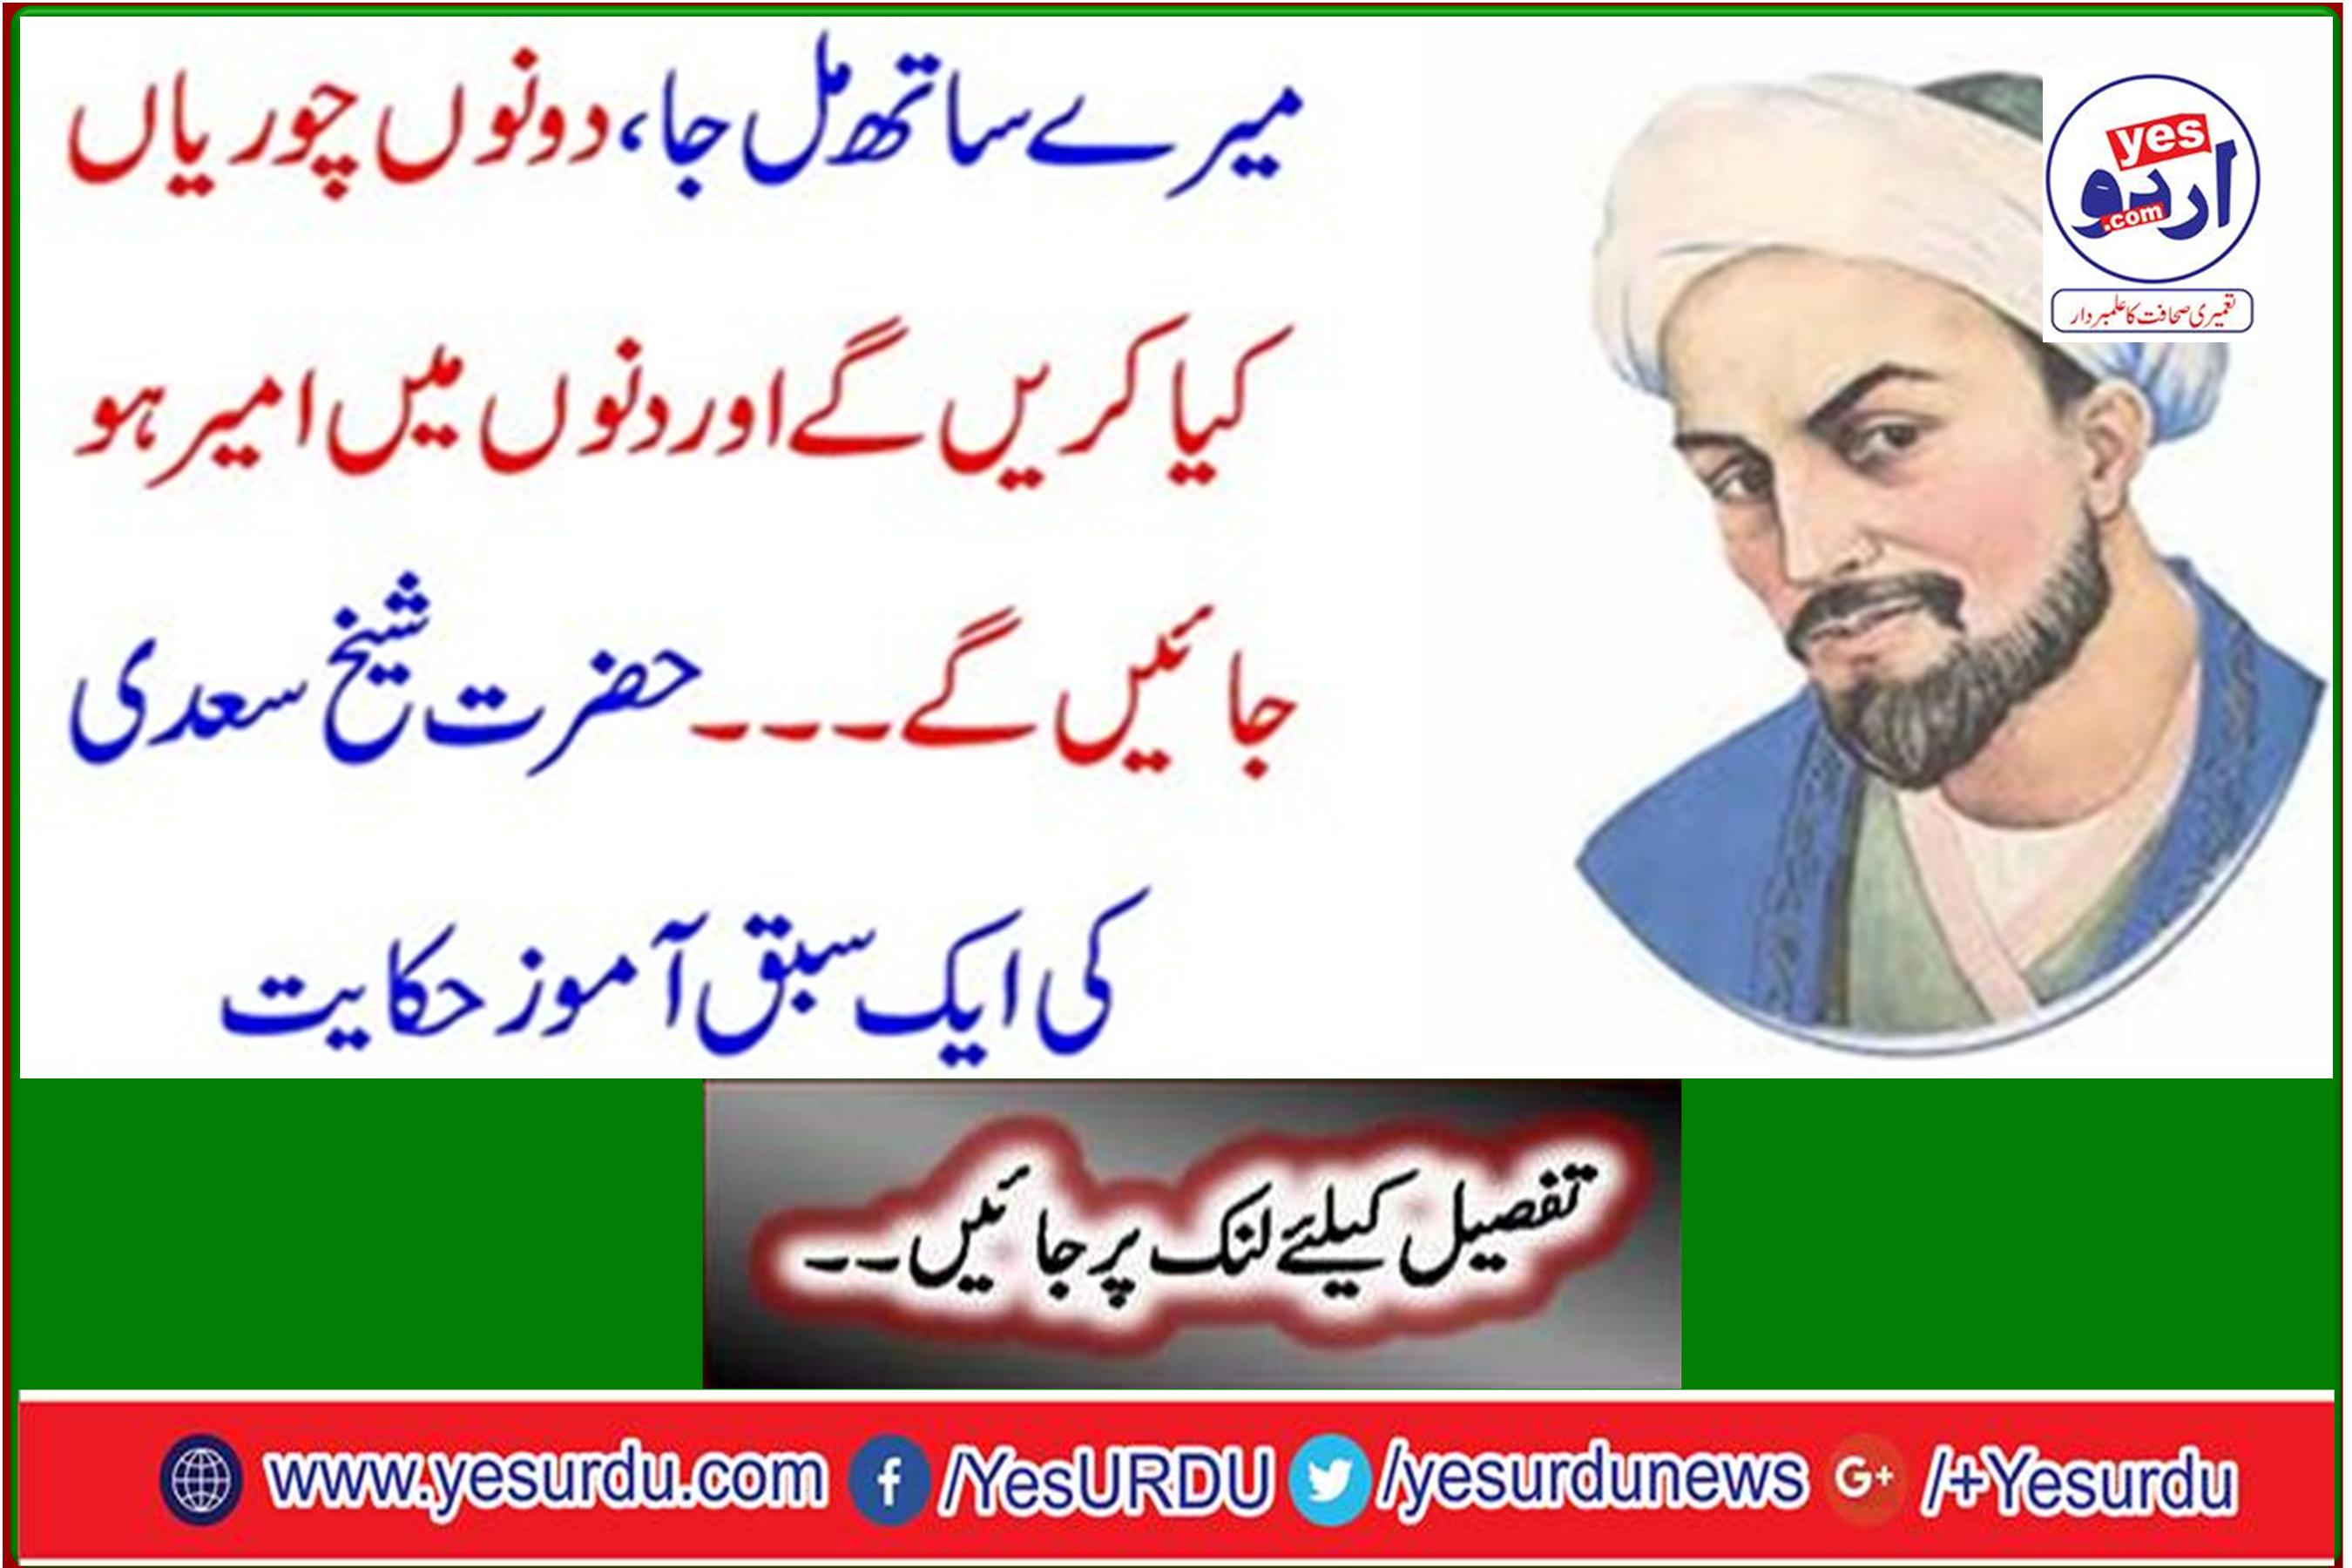 Join me, what will the two thieves do and get rich in days ... A Lesson From Hazrat Sheikh Saadi